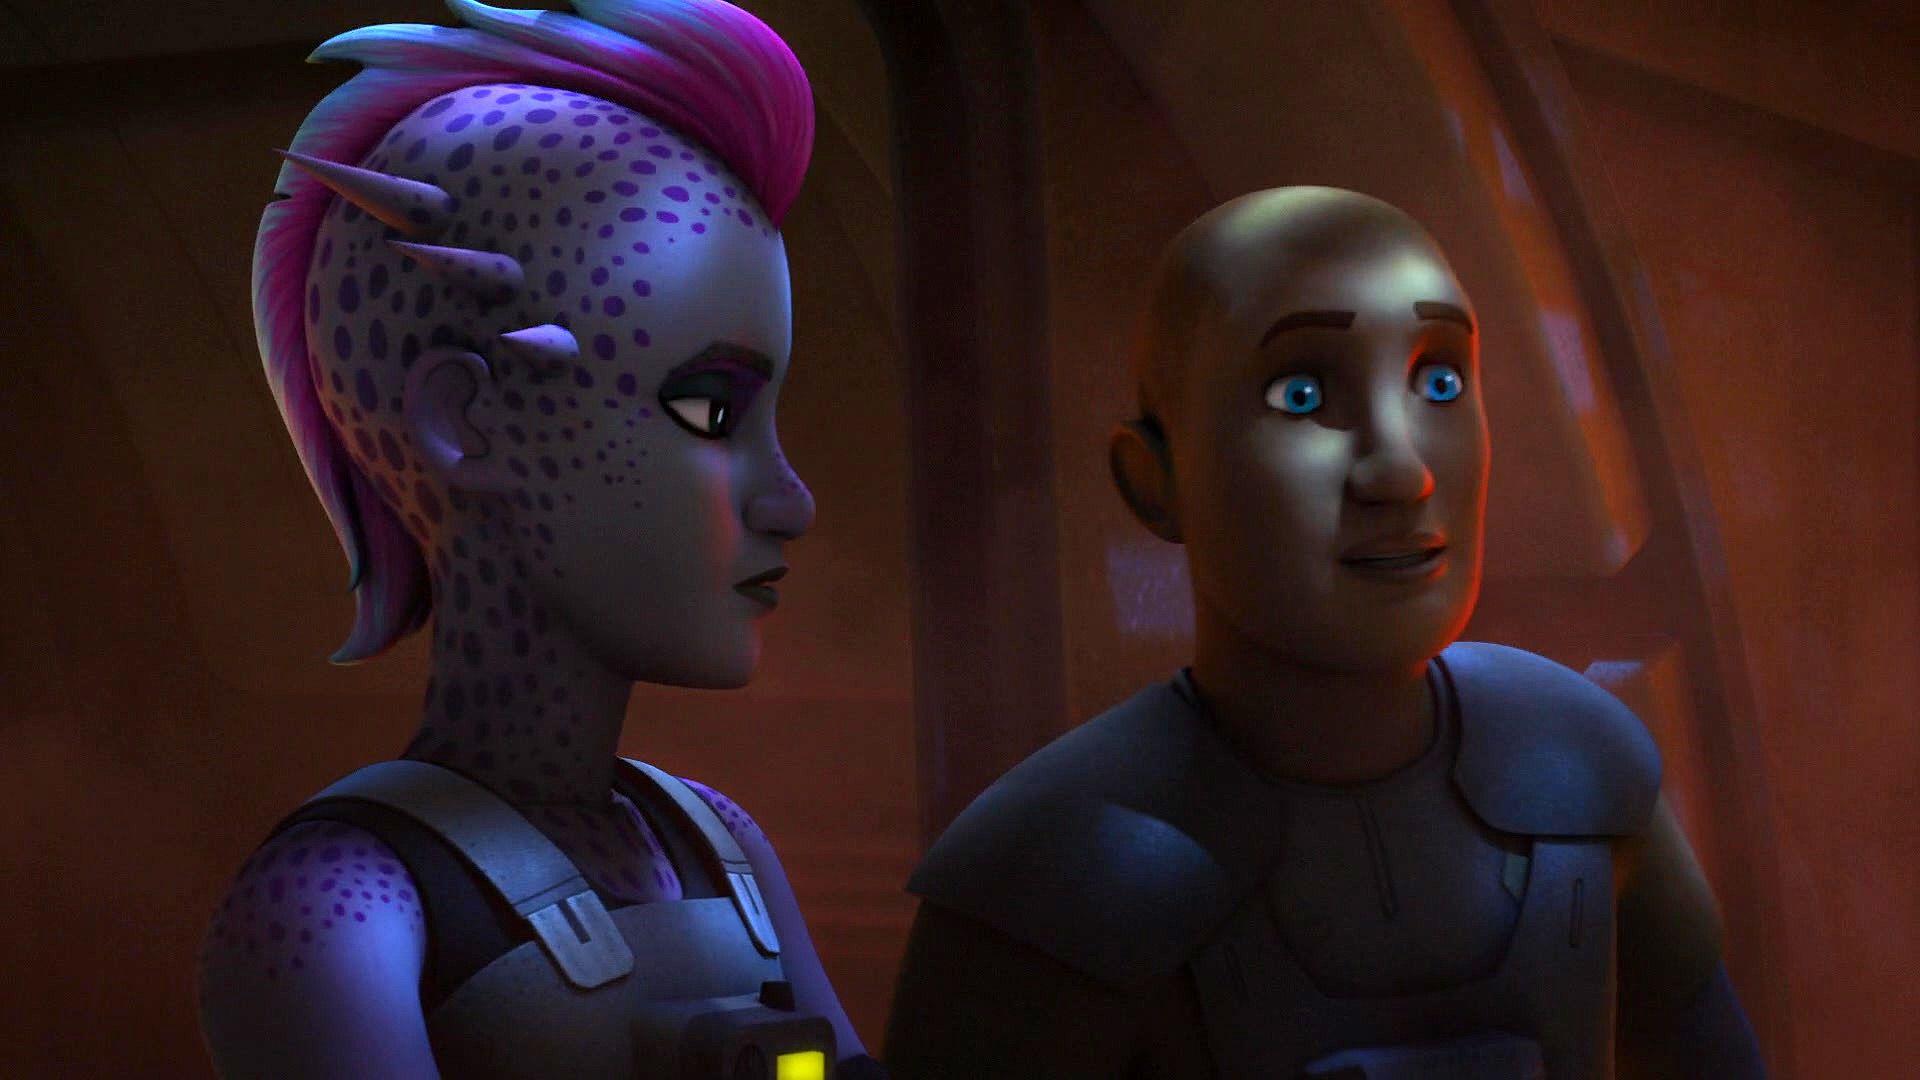 Iron Squadron (Star Wars Rebels) Research